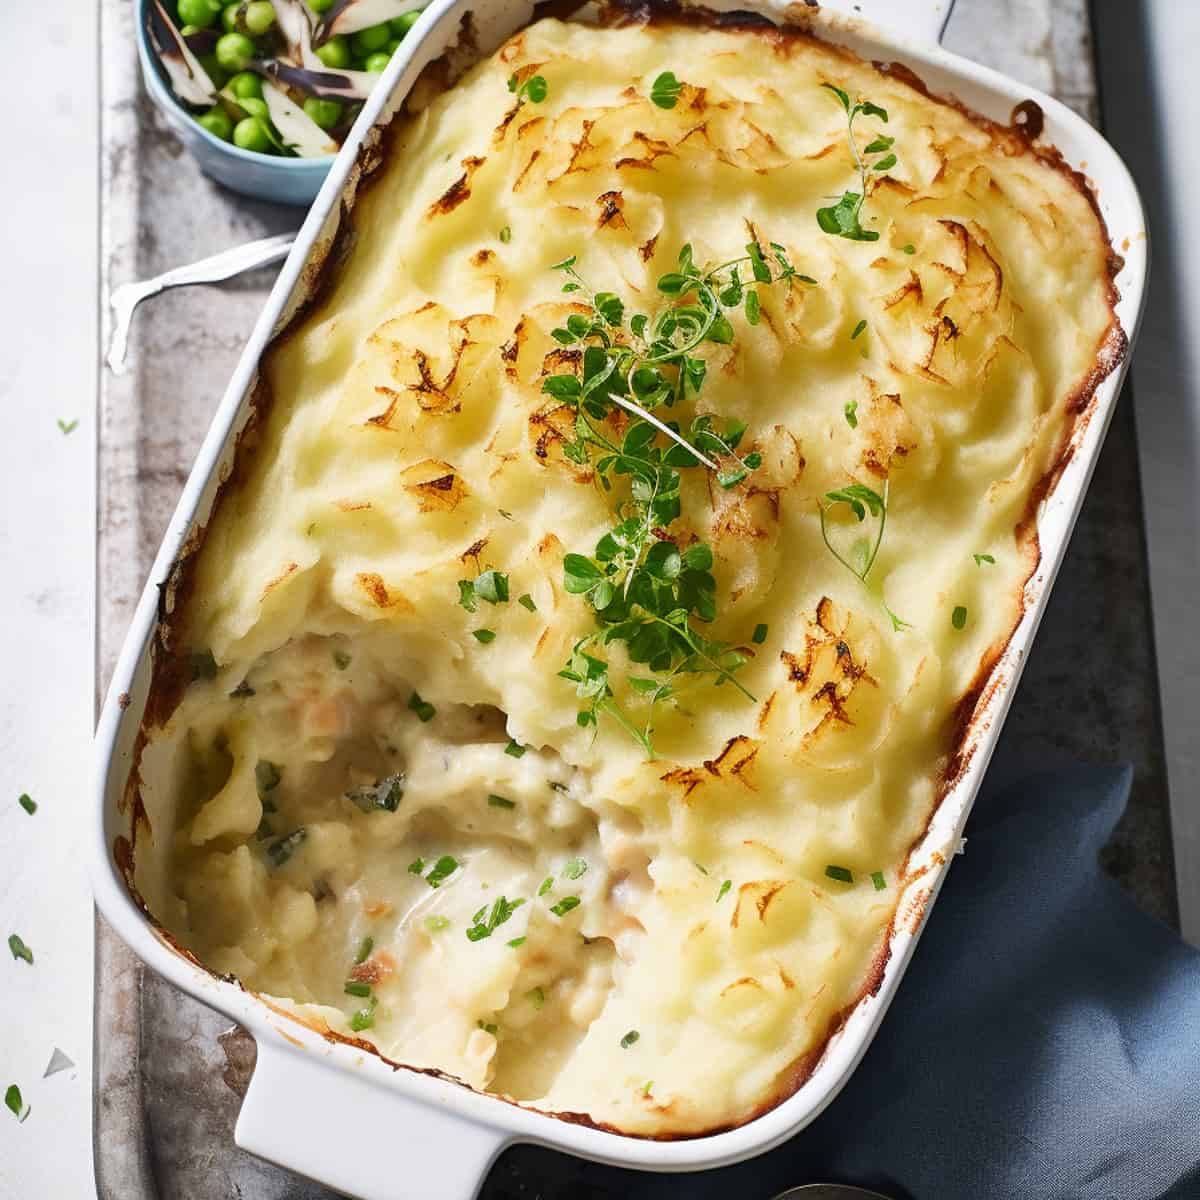 Fish pie in a baking dish with mashed potato topping.